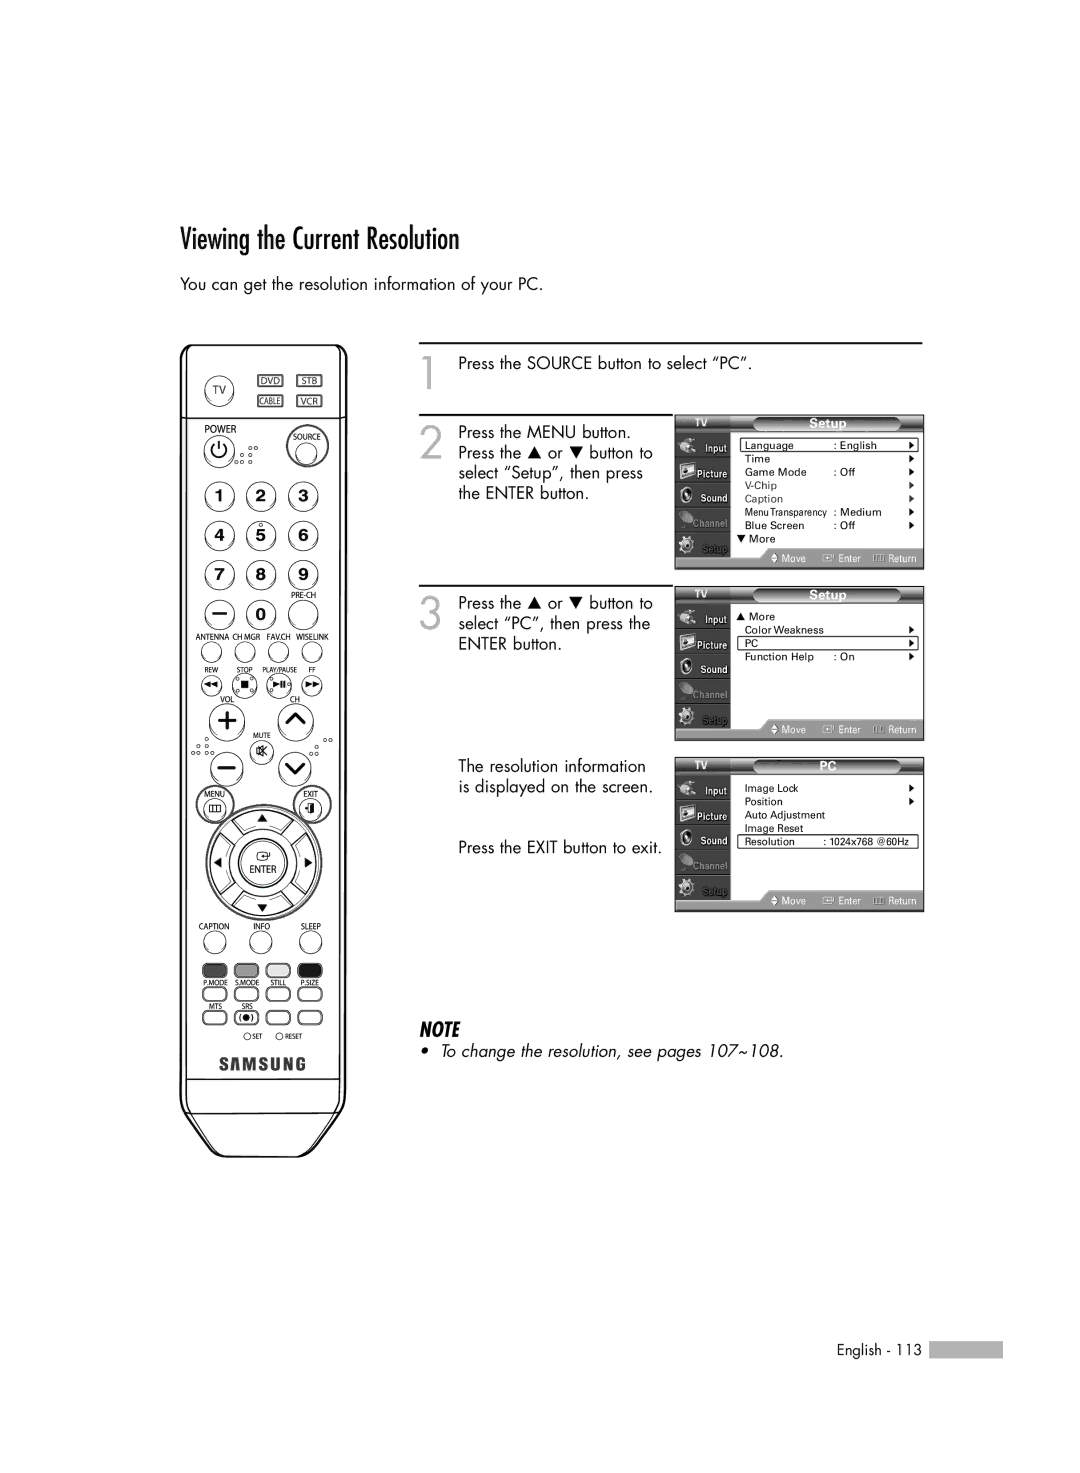 Samsung HL-S4676S manual Viewing the Current Resolution 